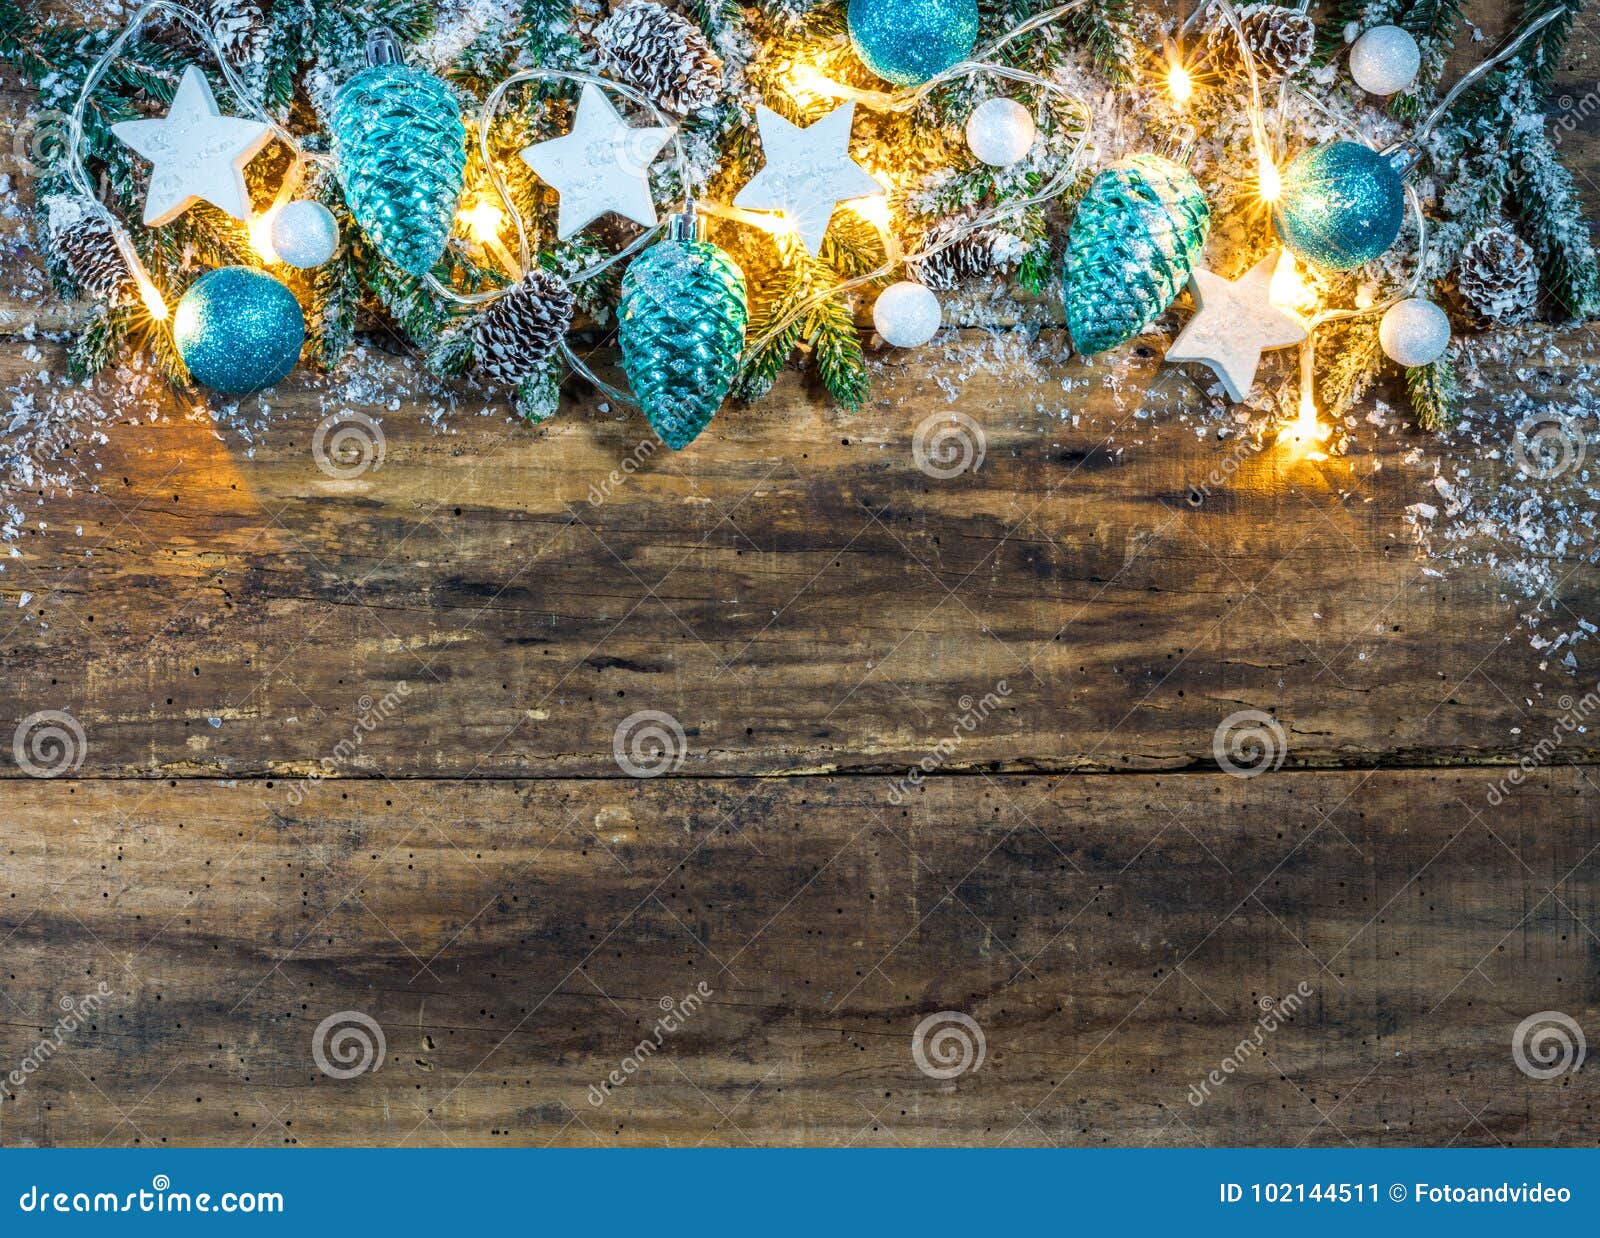 Christmas Decoration with Blue and White Ornaments Stock Image - Image ...